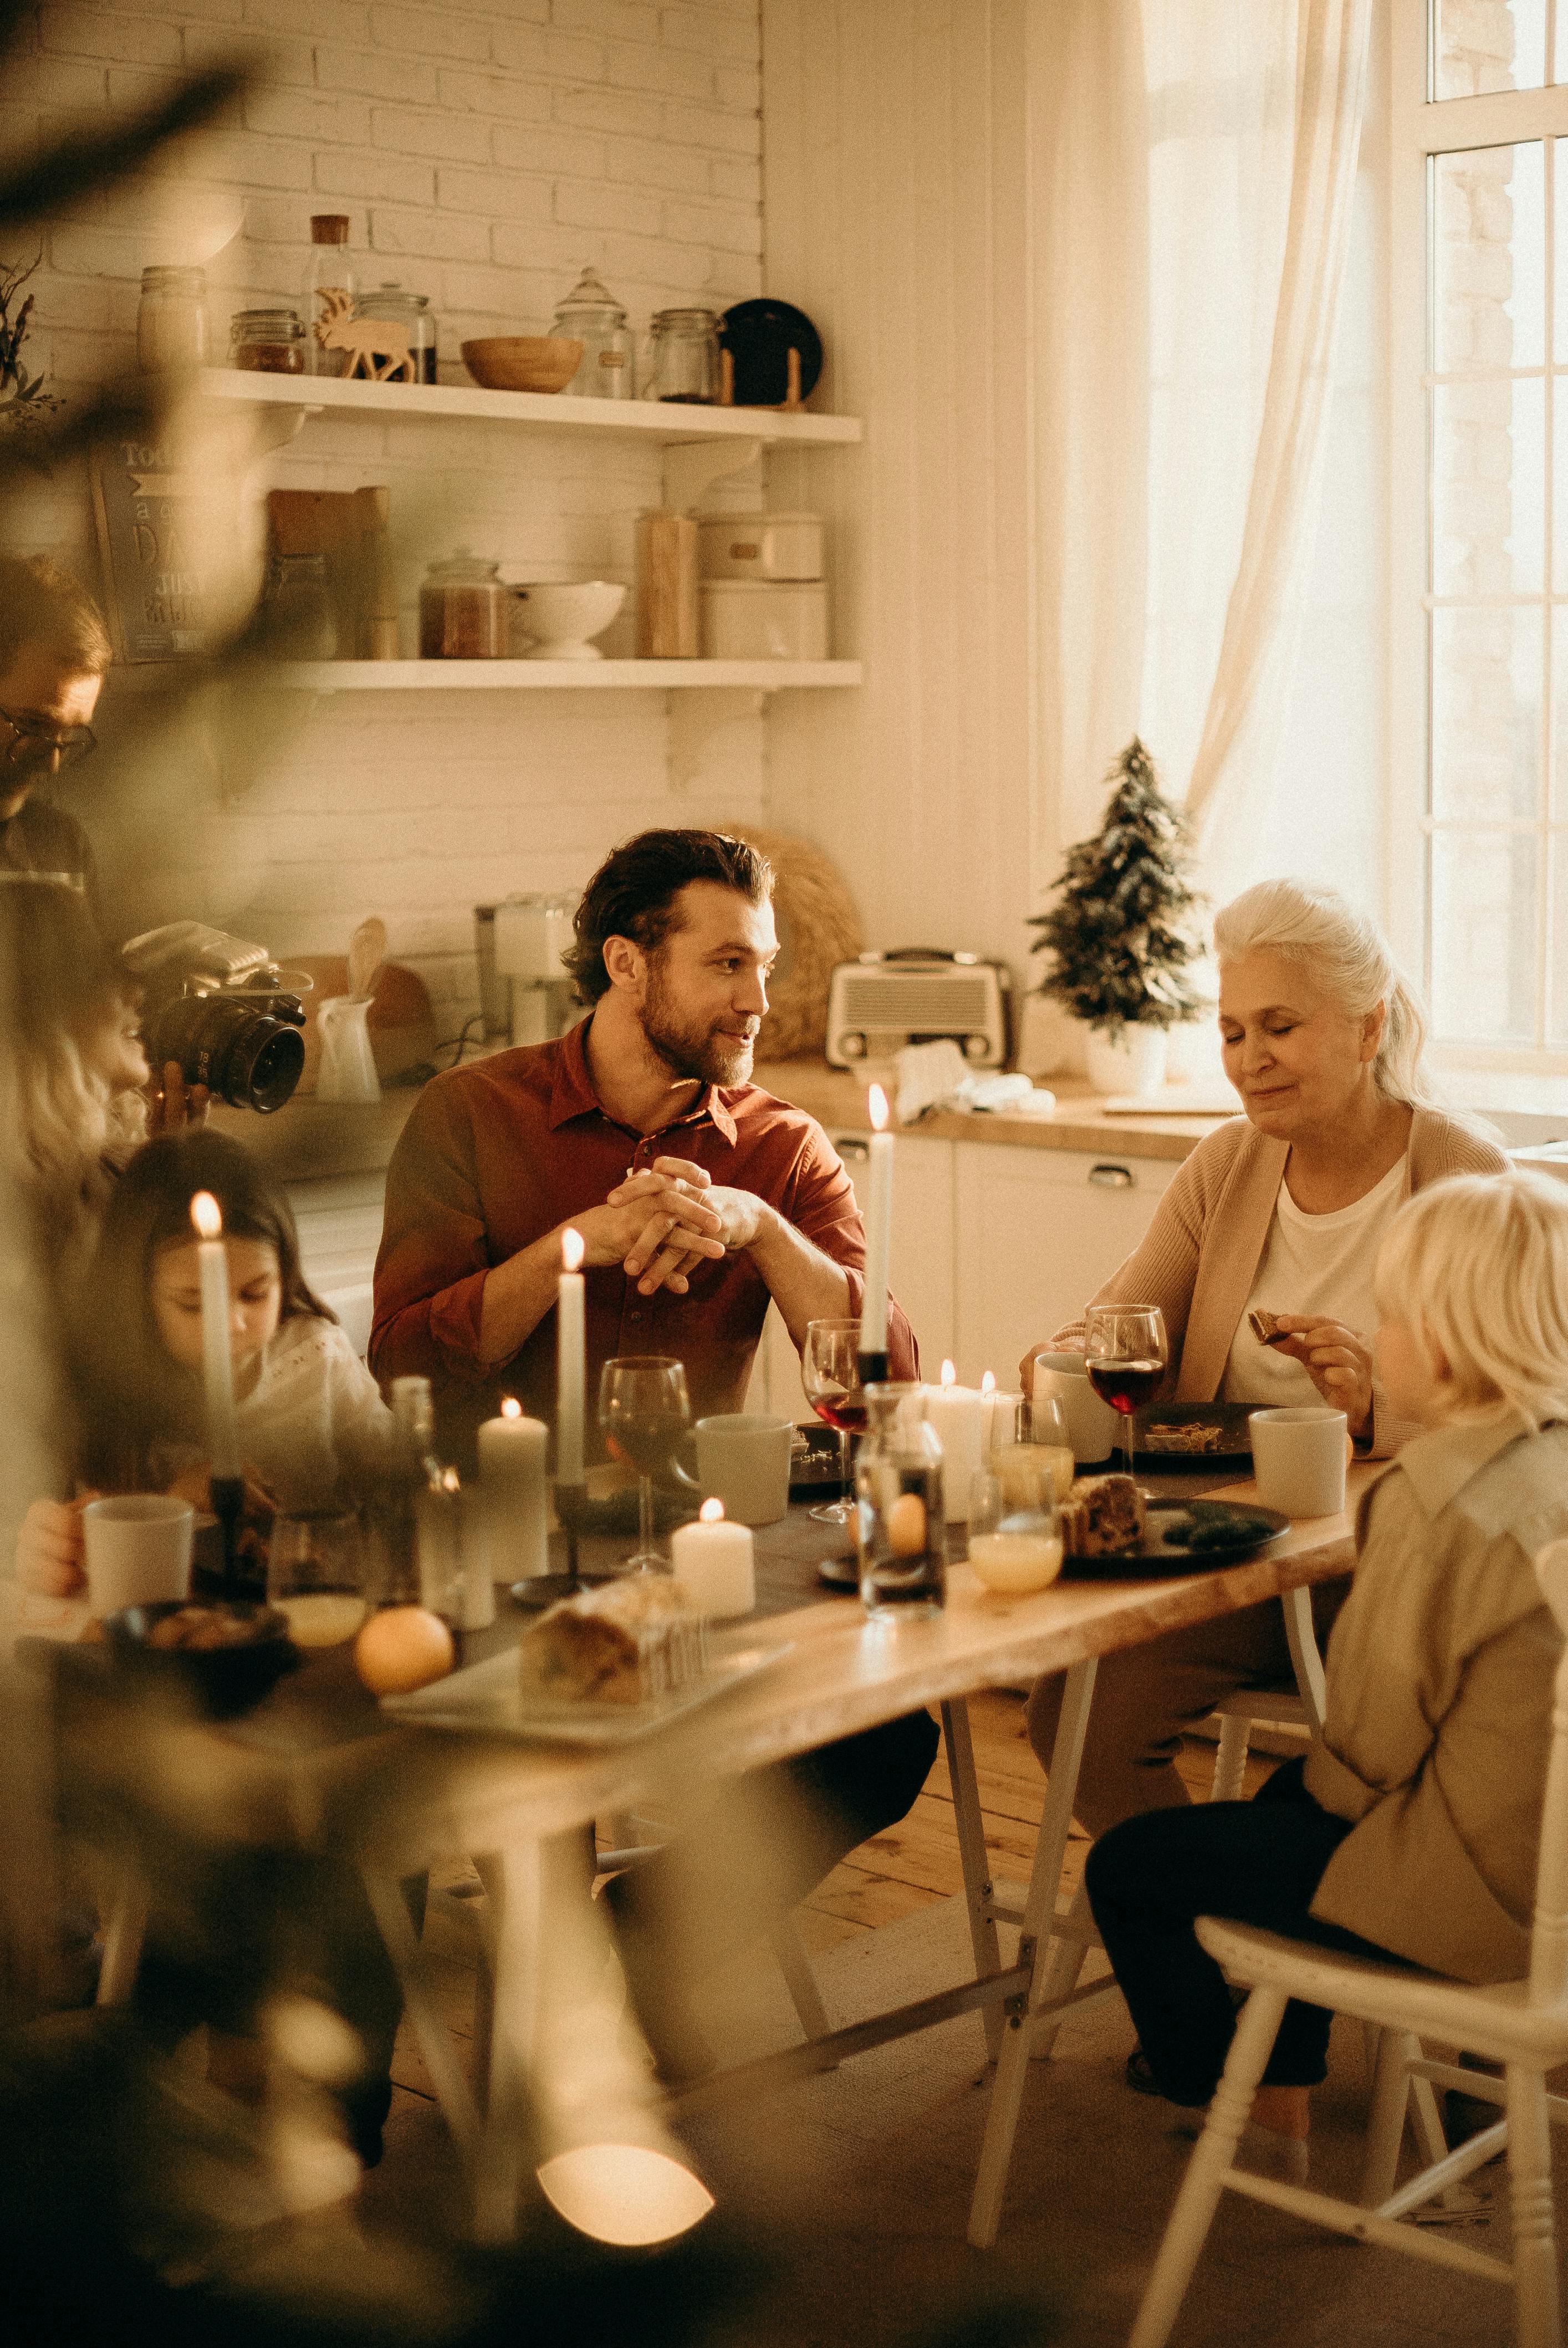 A family sharing a meal | Source: Pexels